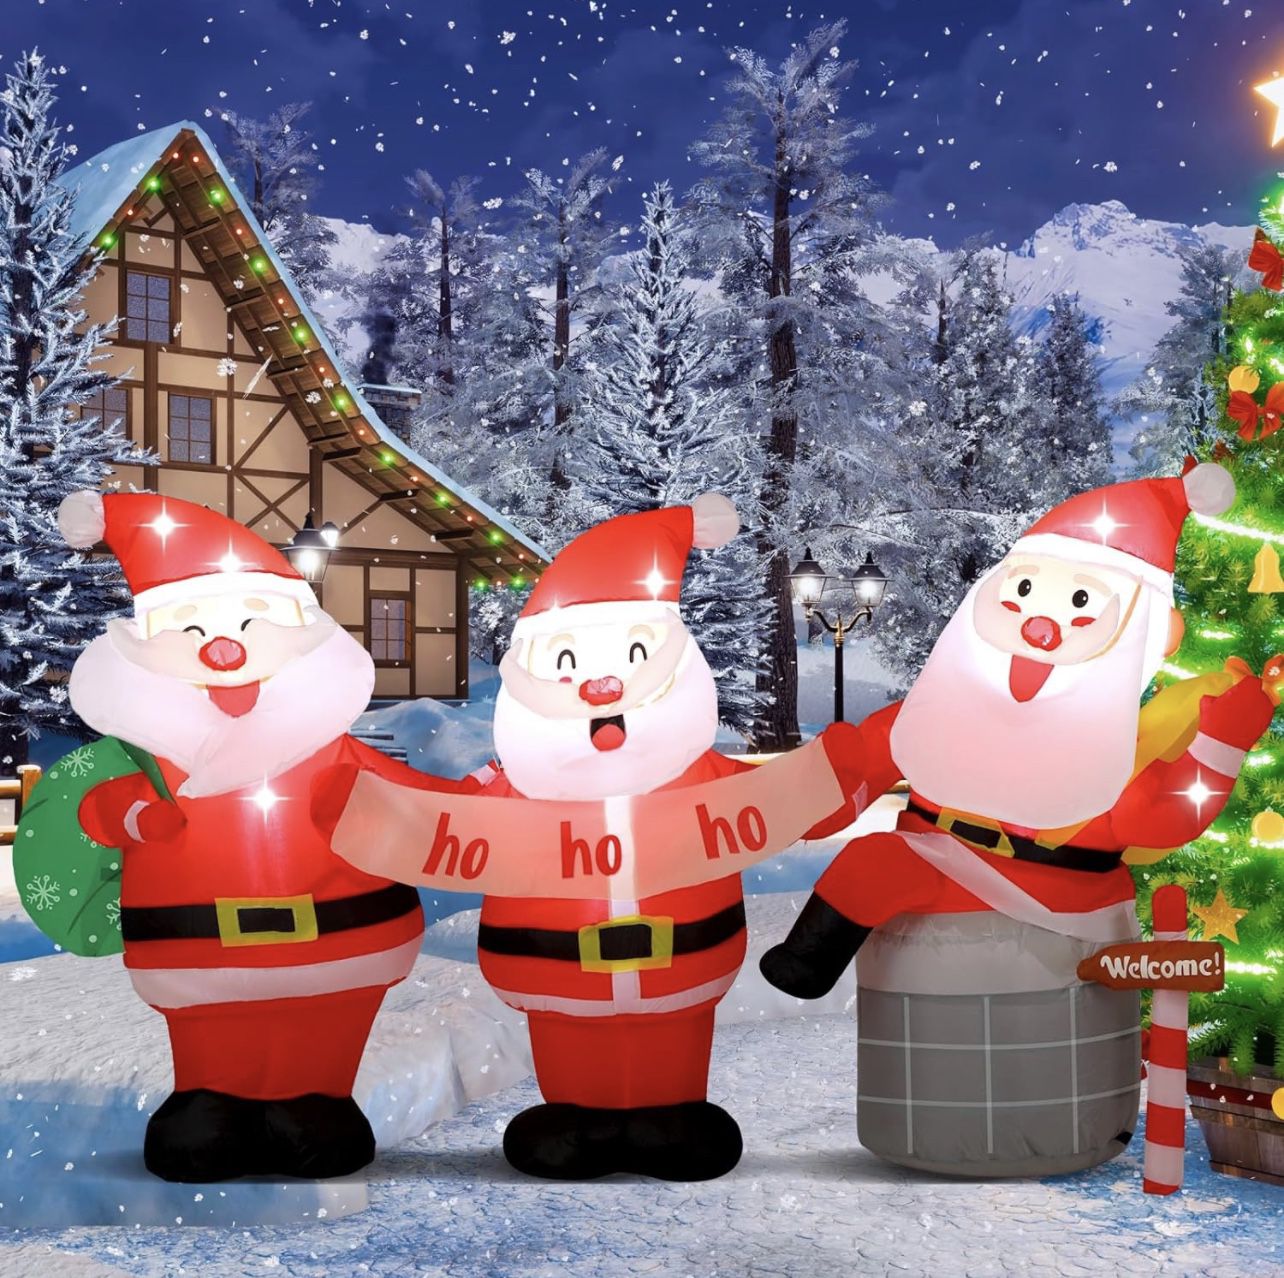 7 ft Long Merry Christmas Inflatables Lighted Santa Claus Christmas Outdoor Decorations Christmas Blow up Yard Decorations Built in LED Lights for Xma